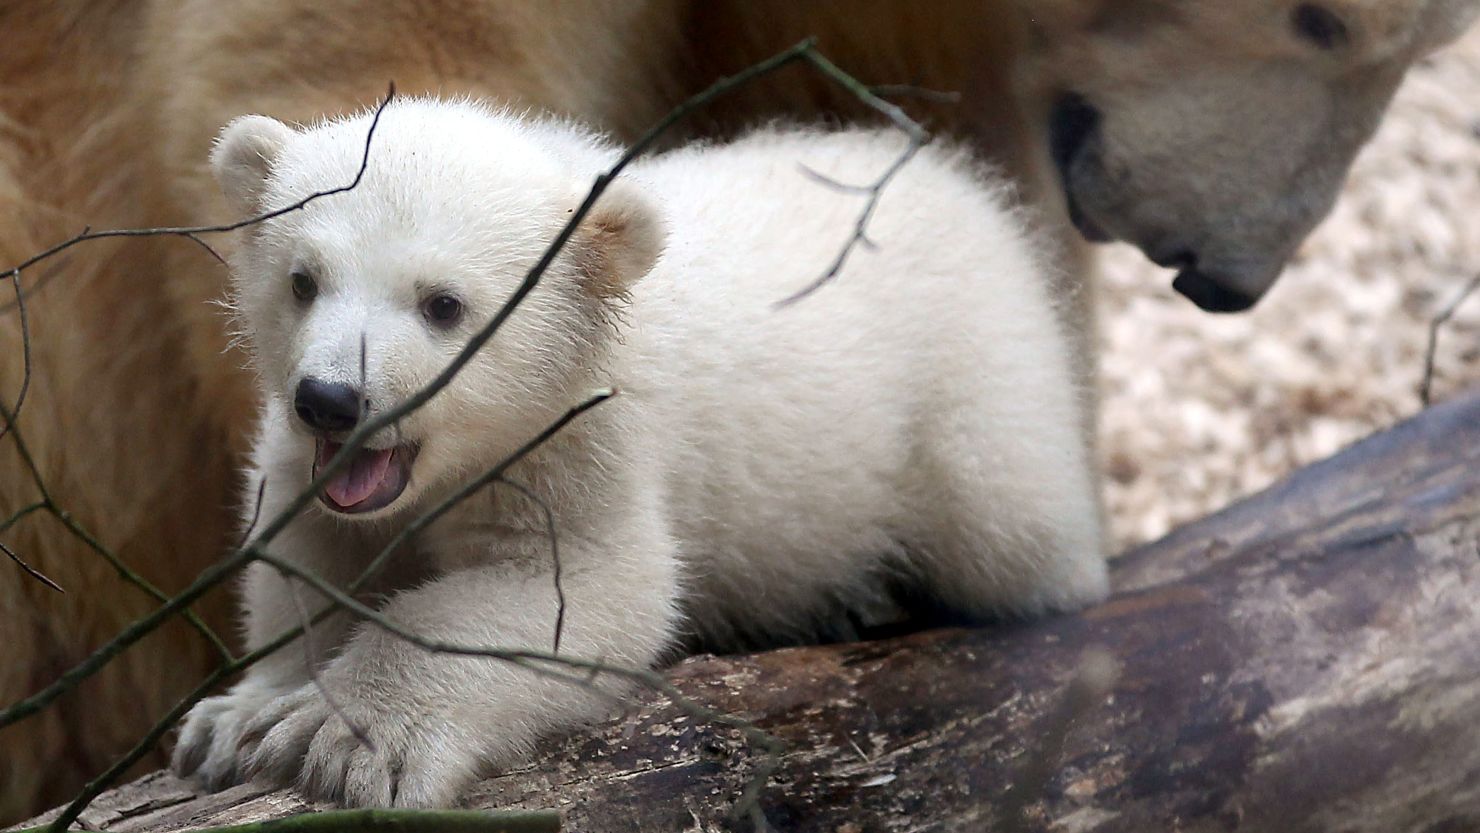 Polar bear cub Anori explores the enclosure at the zoo in Wuppertal, Germany. 